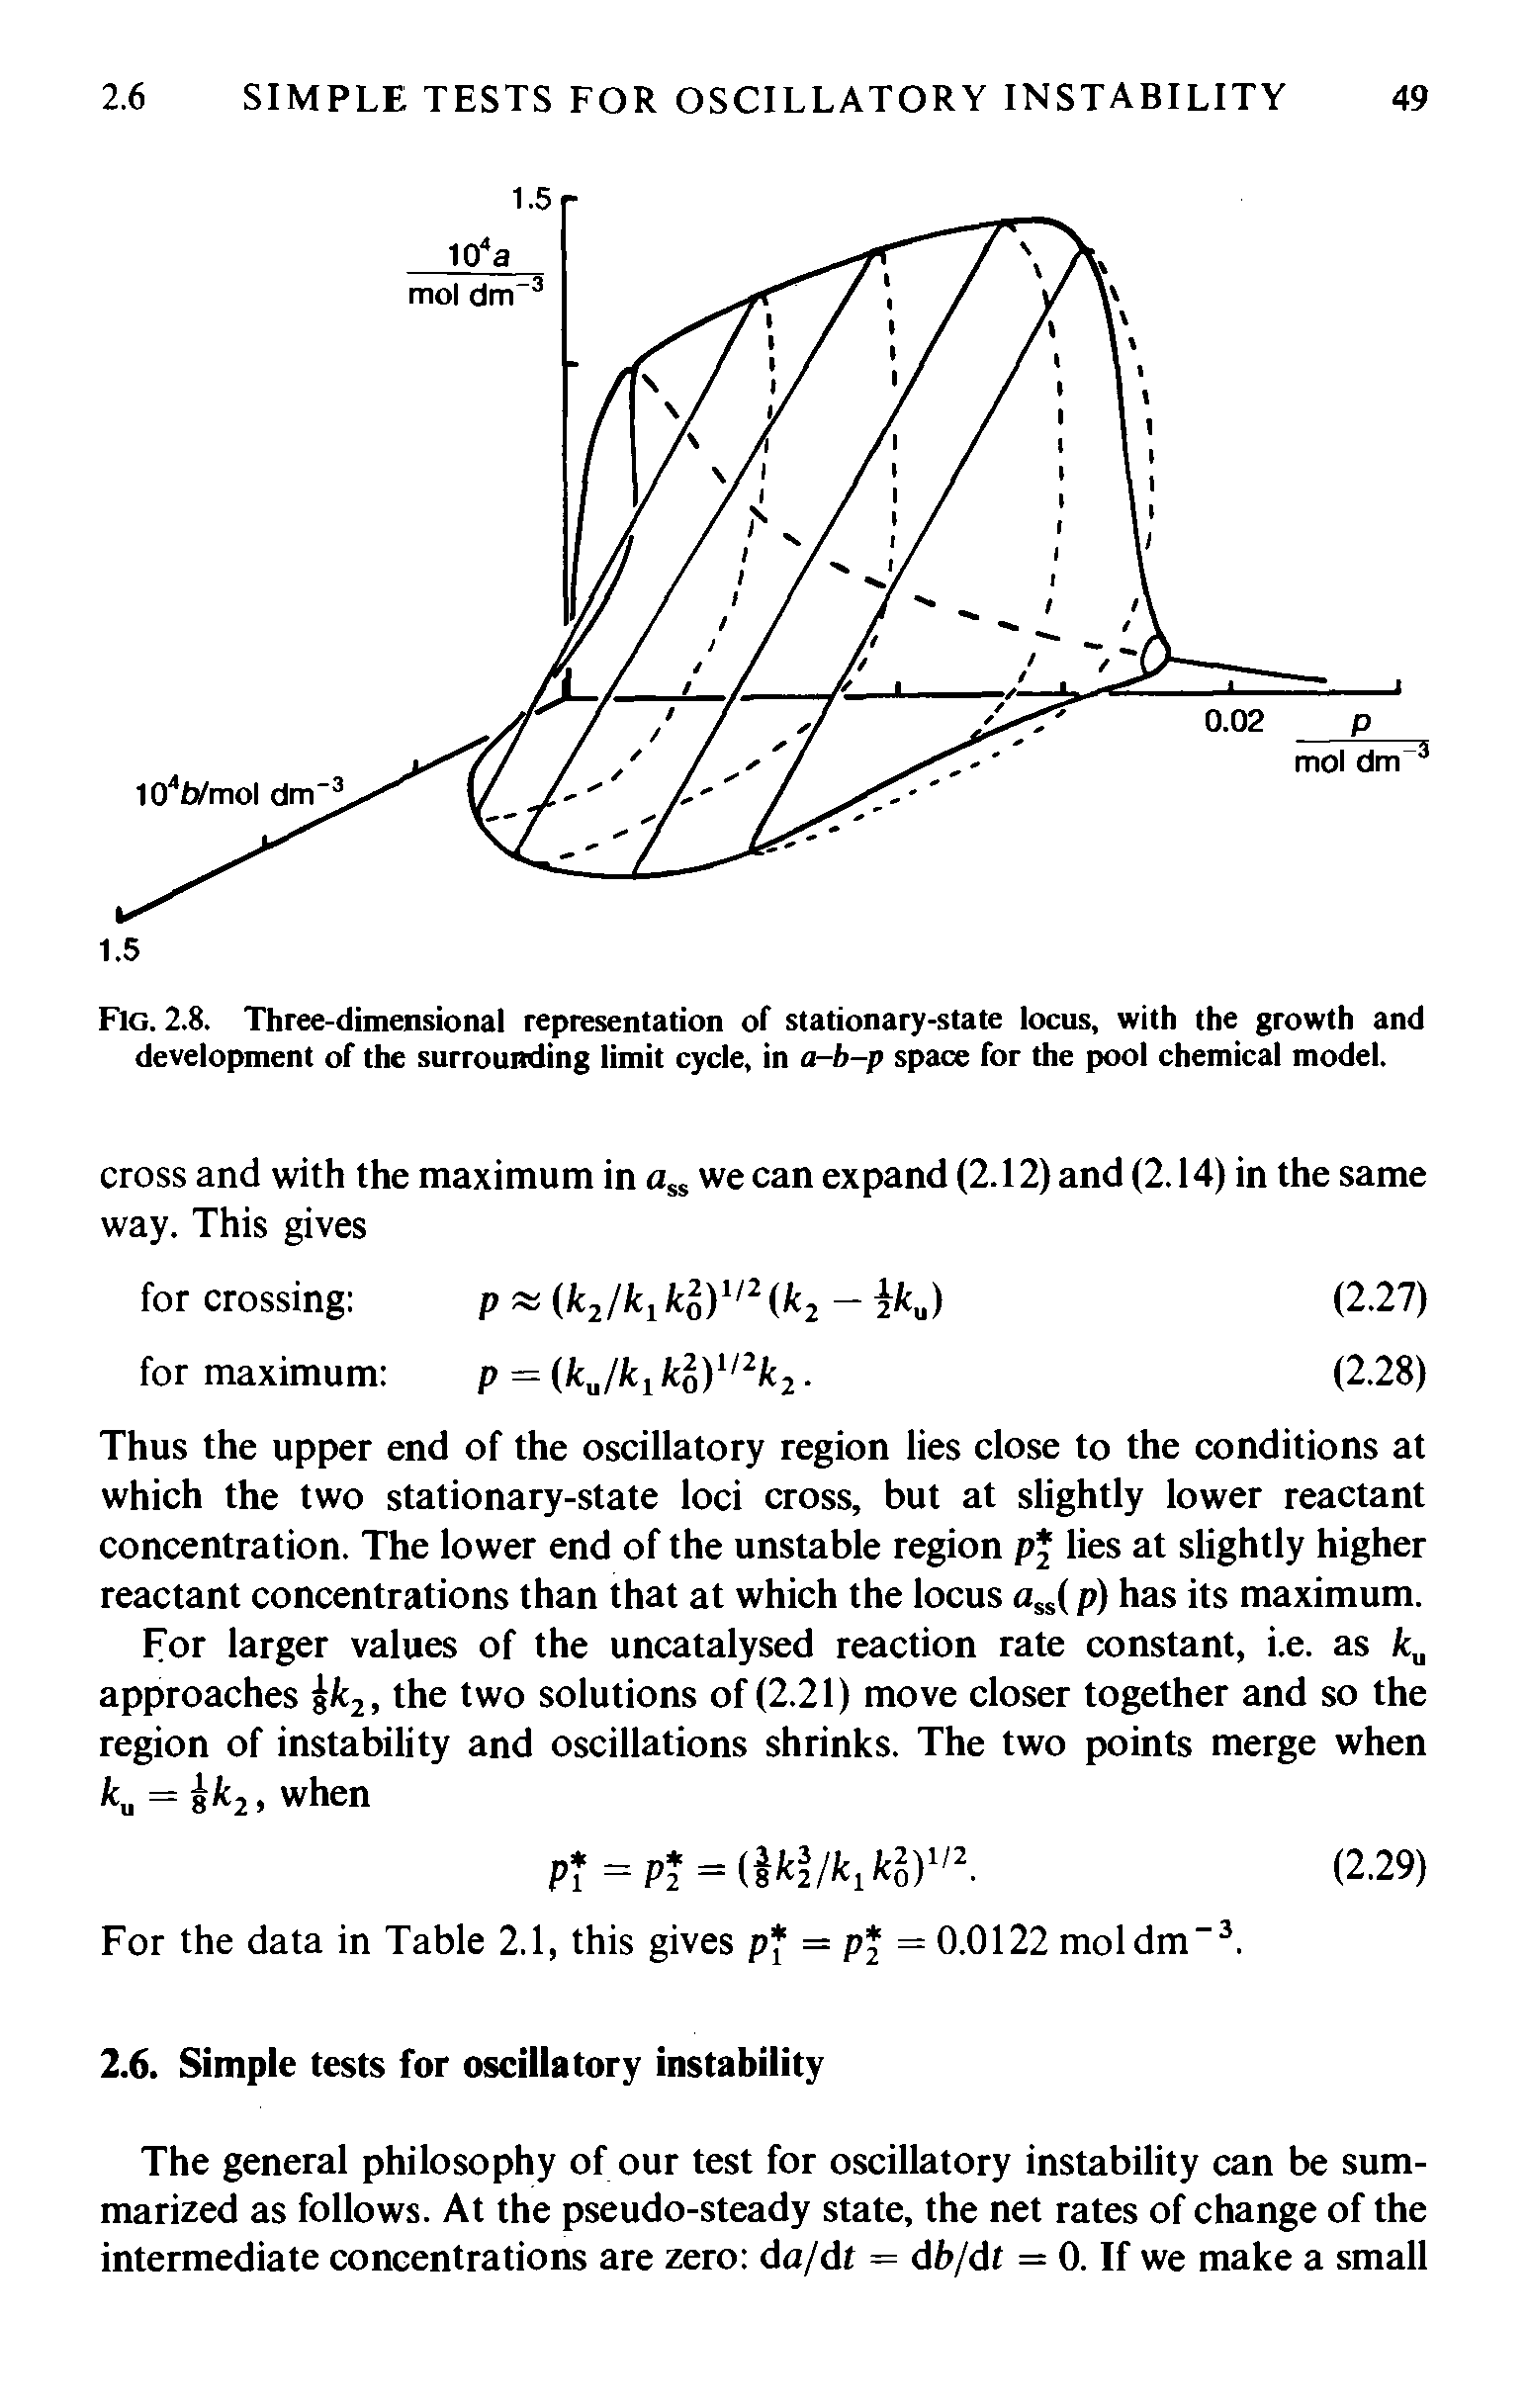 Fig. 2.8. Three-dimensional representation of stationary-state locus, with the growth and development of the surrounding limit cycle, in a-b-p space for the pool chemical model.